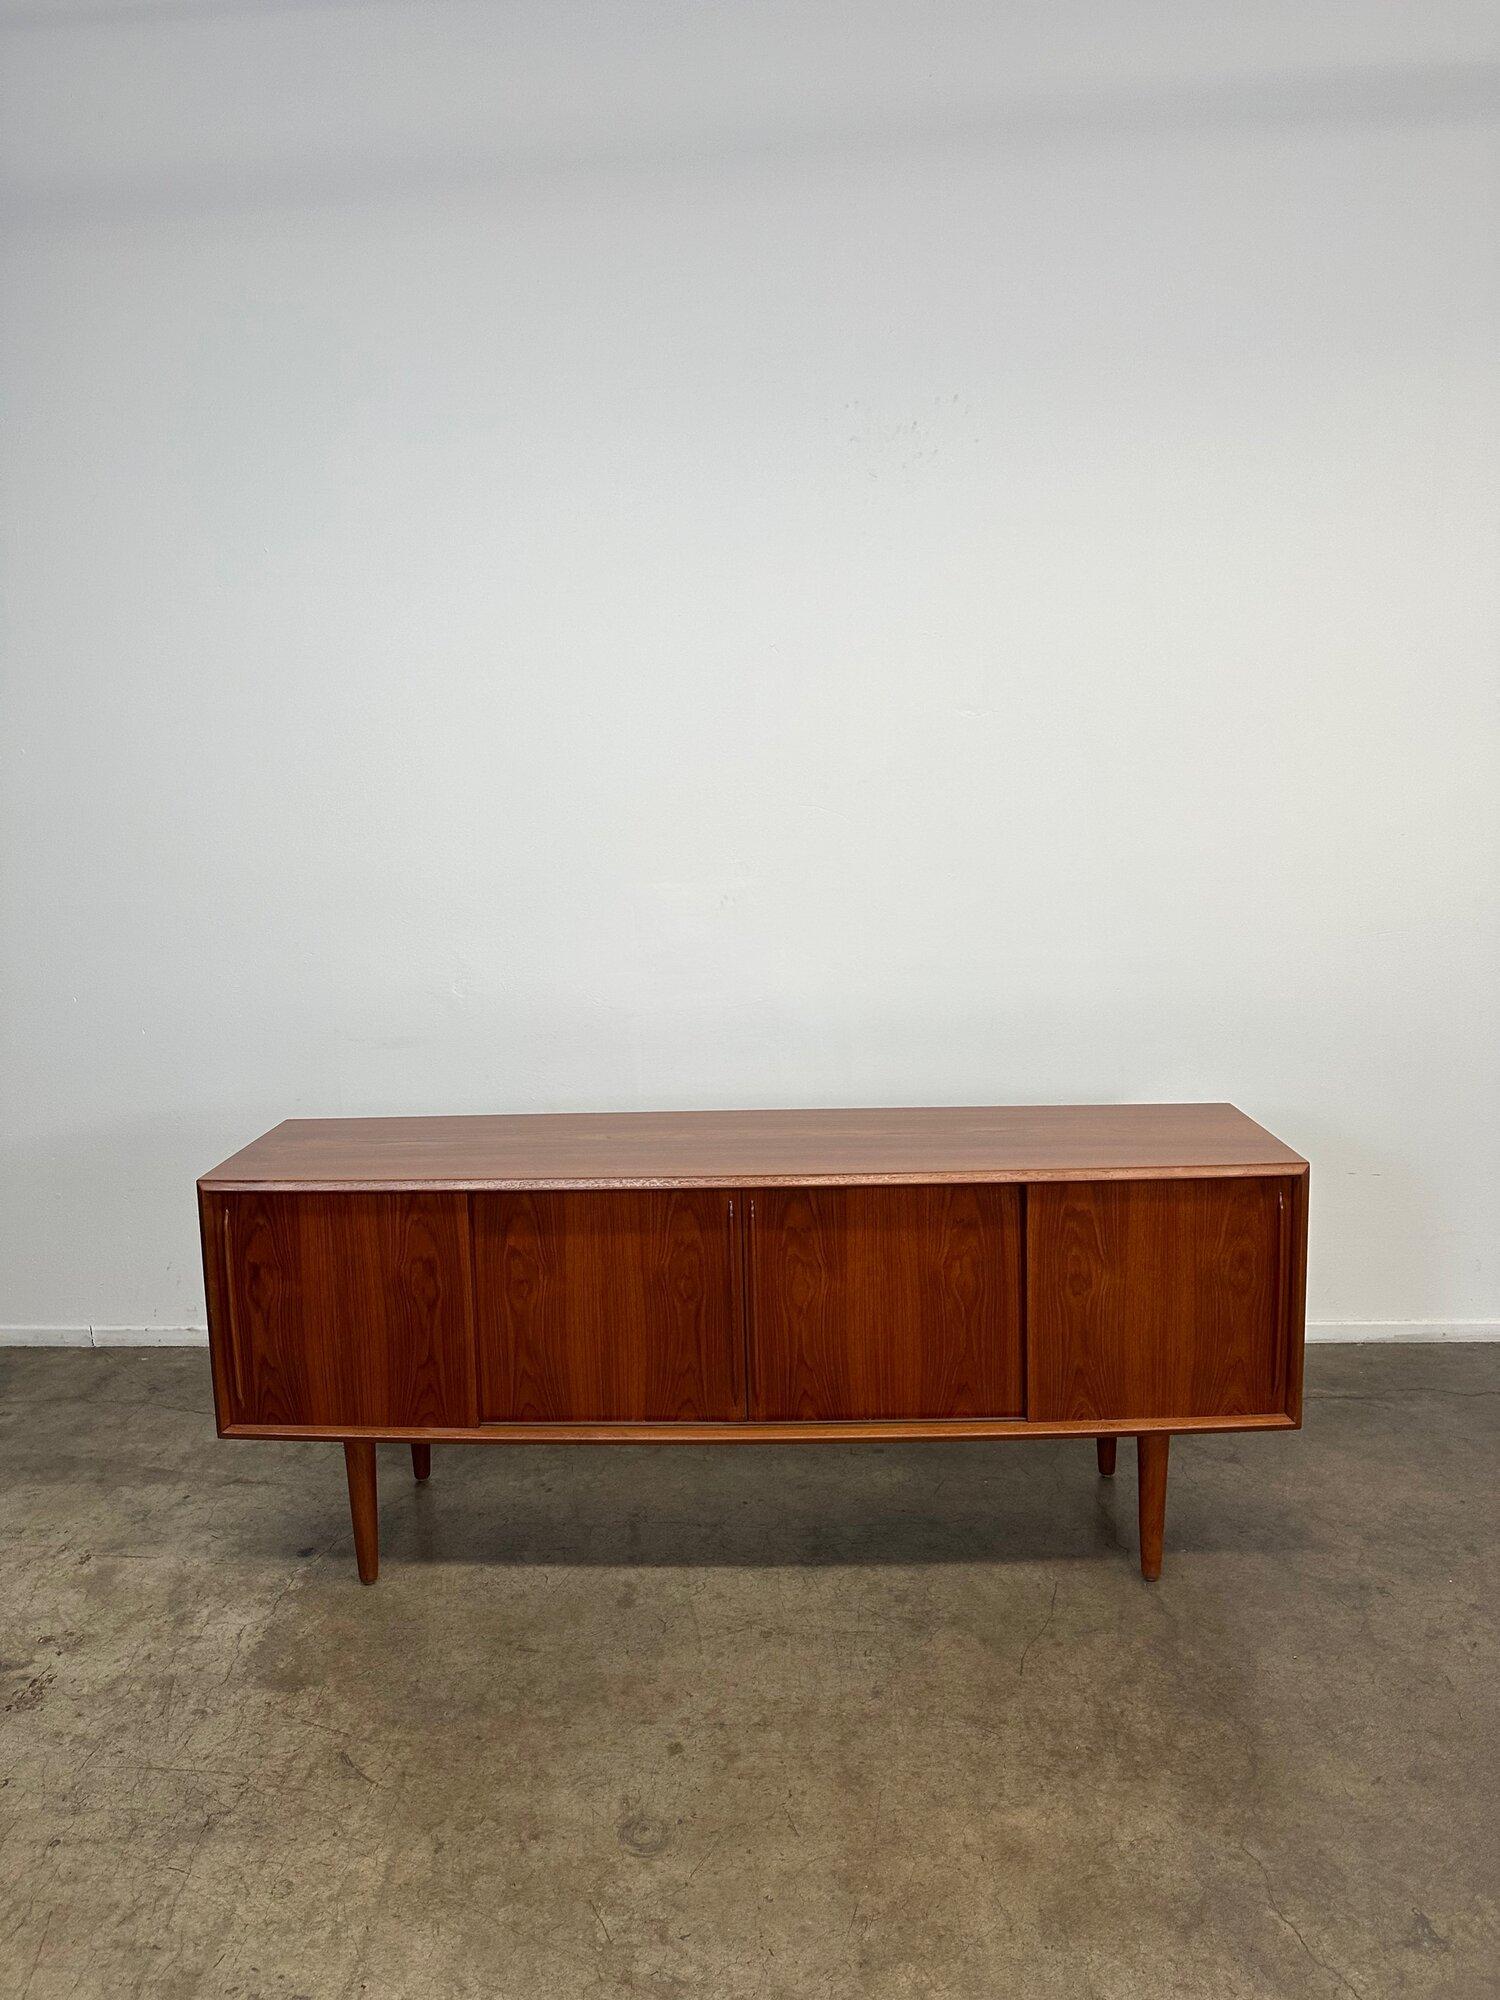 Fully restored teak credenza in excellent condition. This item has been inspected by our in house carpenters and fully refinished. Item is structurally sound and aesthetically shows well. 
